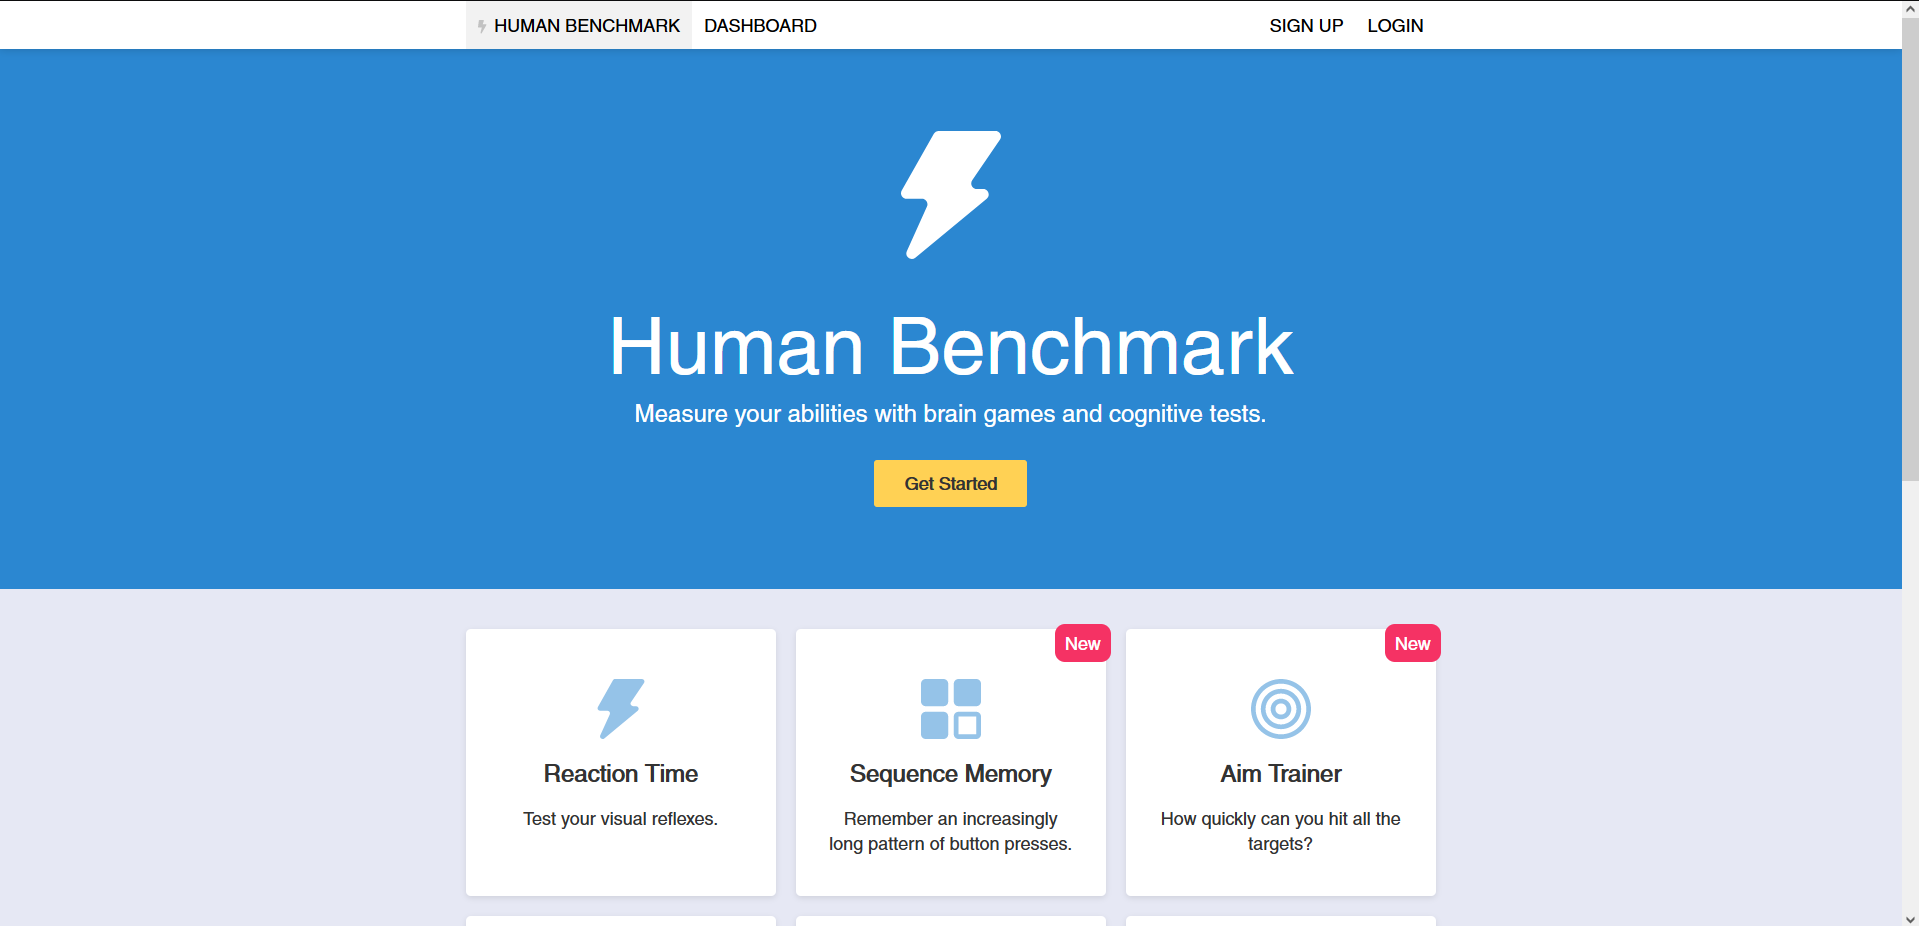 Hacking the Human Benchmark. Just today, one of my friends showed